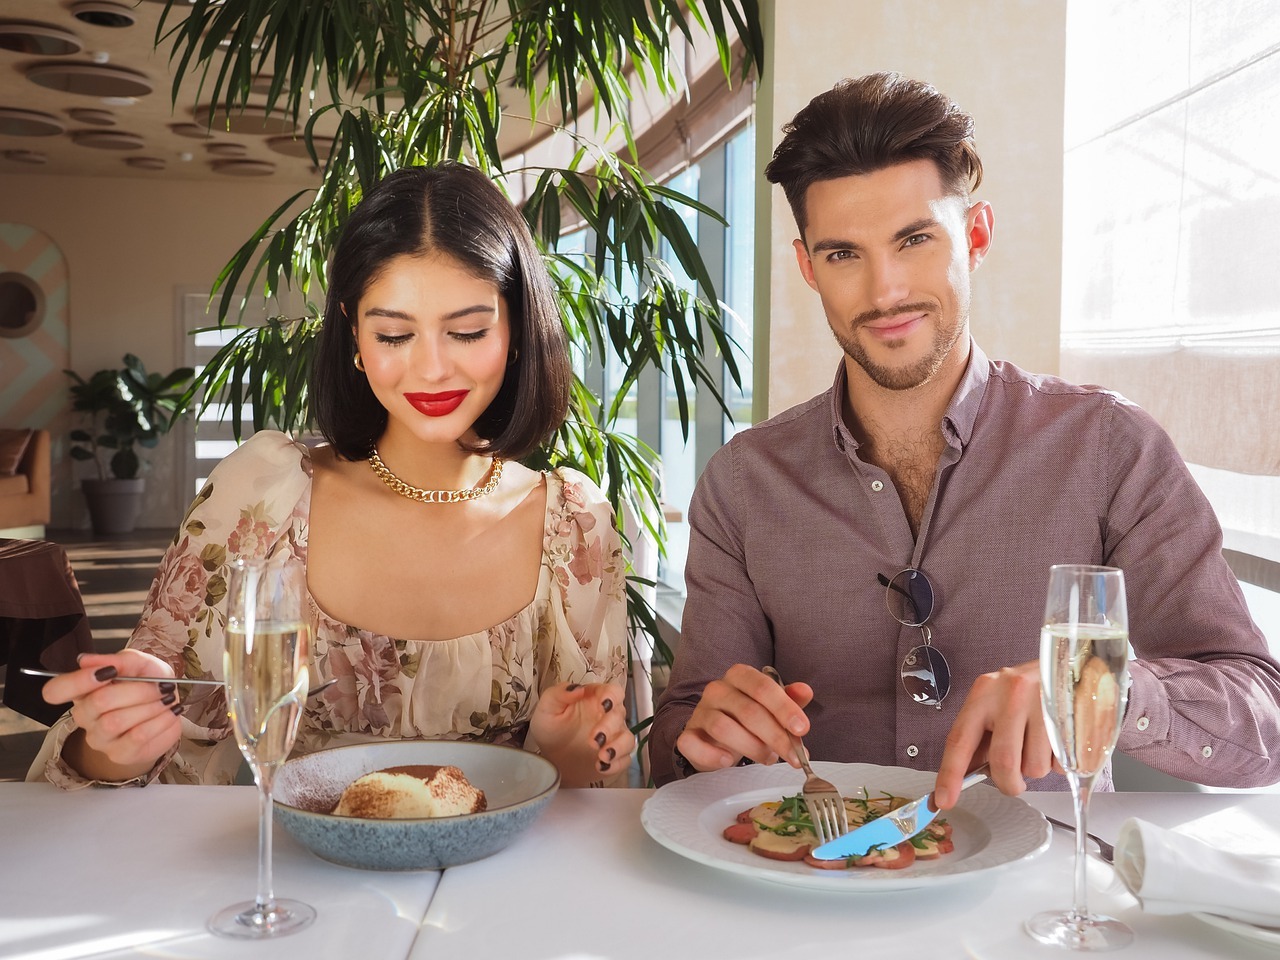 Beyond Dinner and a Movie - Innovative First Date Ideas for the Modern Dater